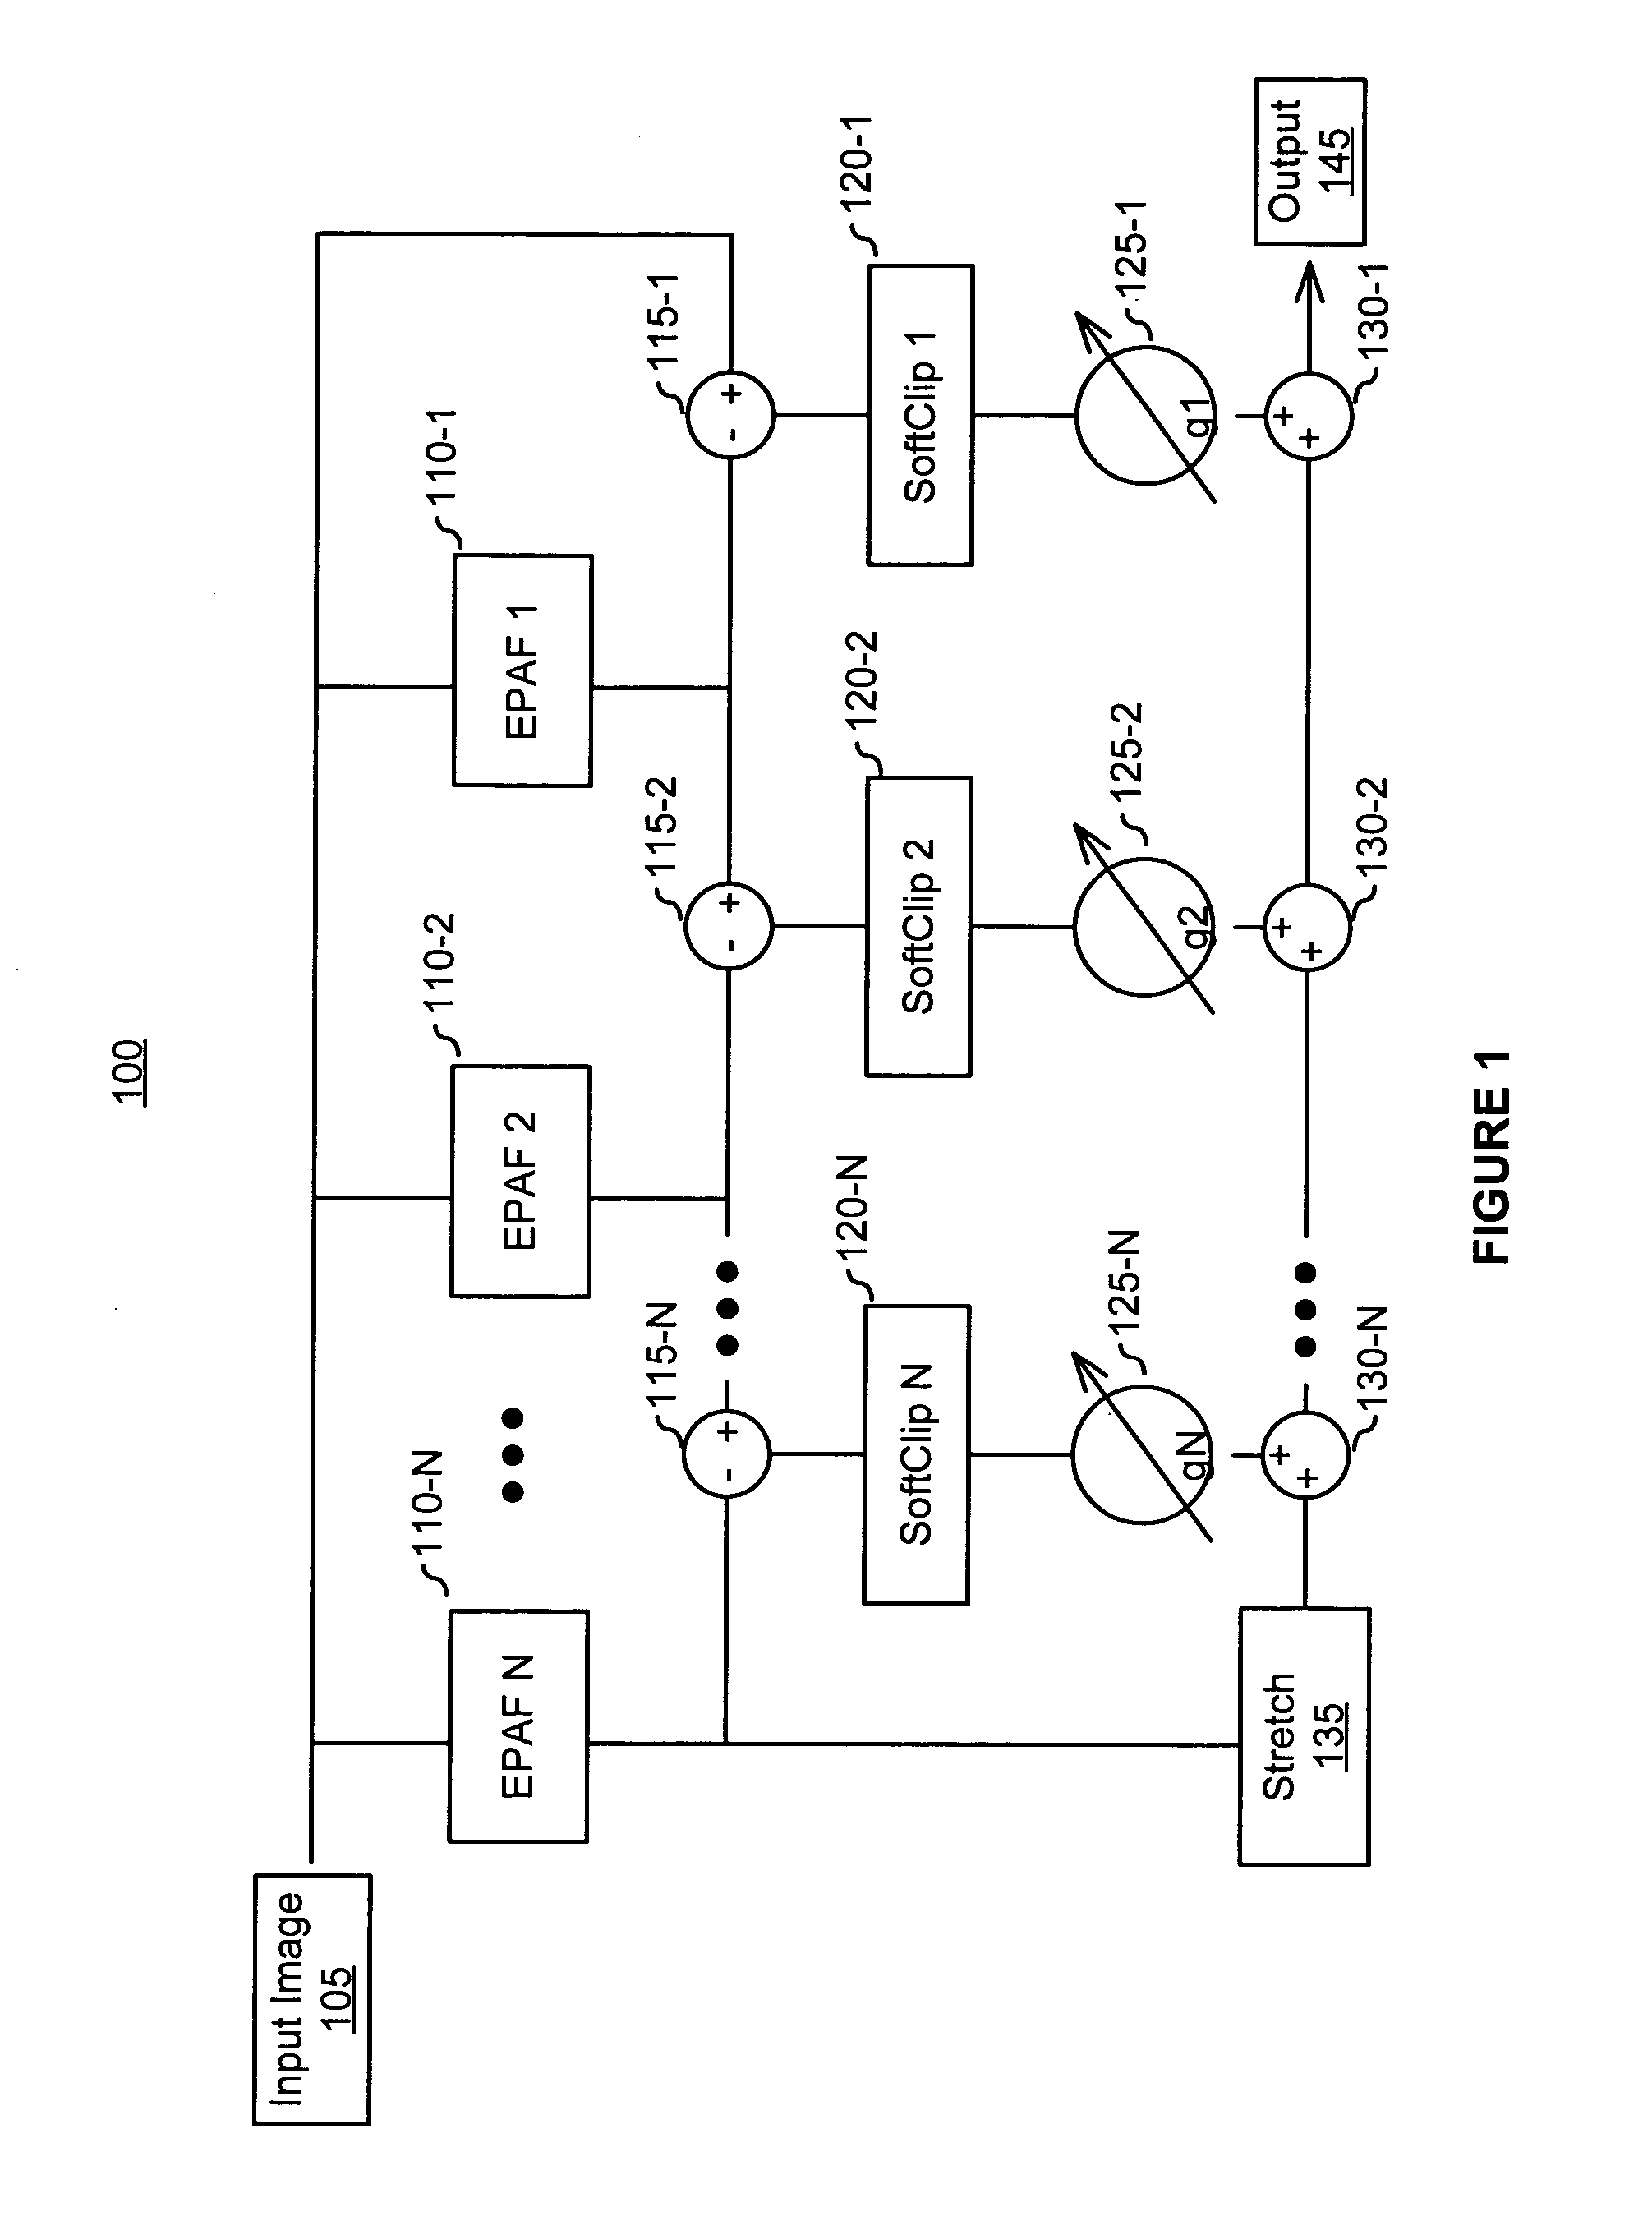 Systems and methods for contrast adjustment